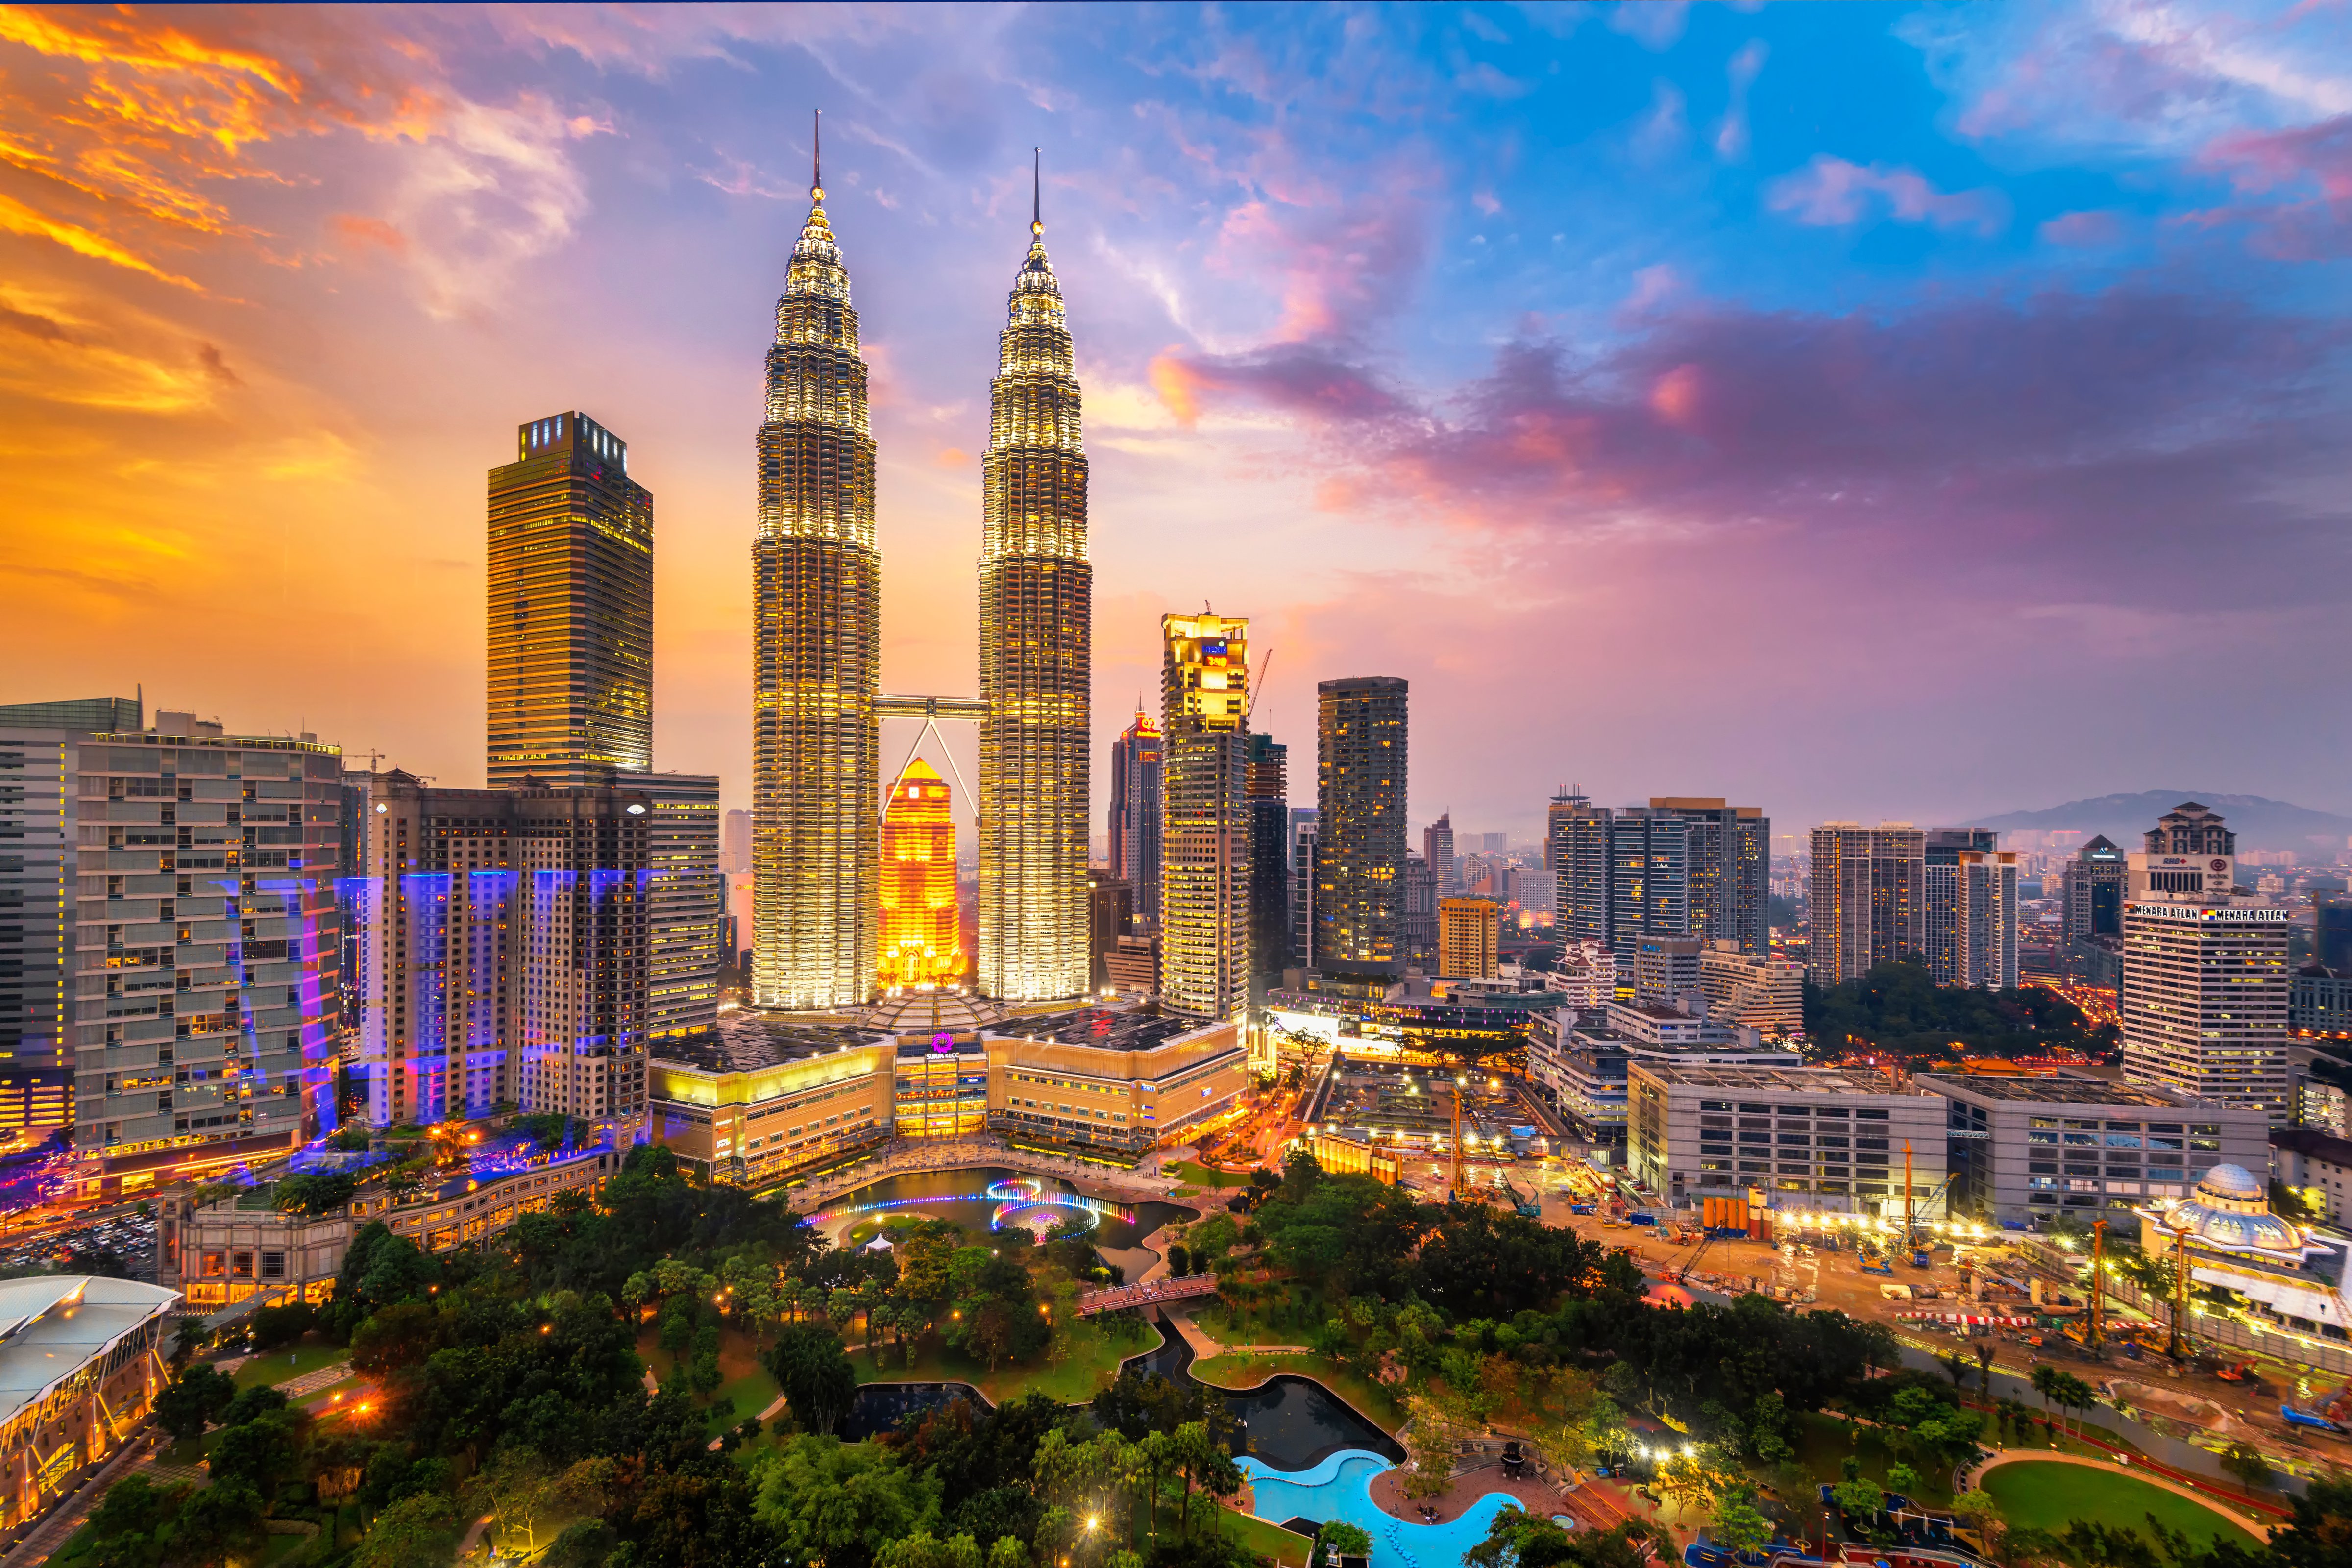 The Petronas Twin Towers on February 12, 2014, in Kuala Lumpur, Malaysia are the world's tallest twin tower. The skyscraper height is 451.9m (Ratnakorn Piyasirisorost&mdash;Getty Images)